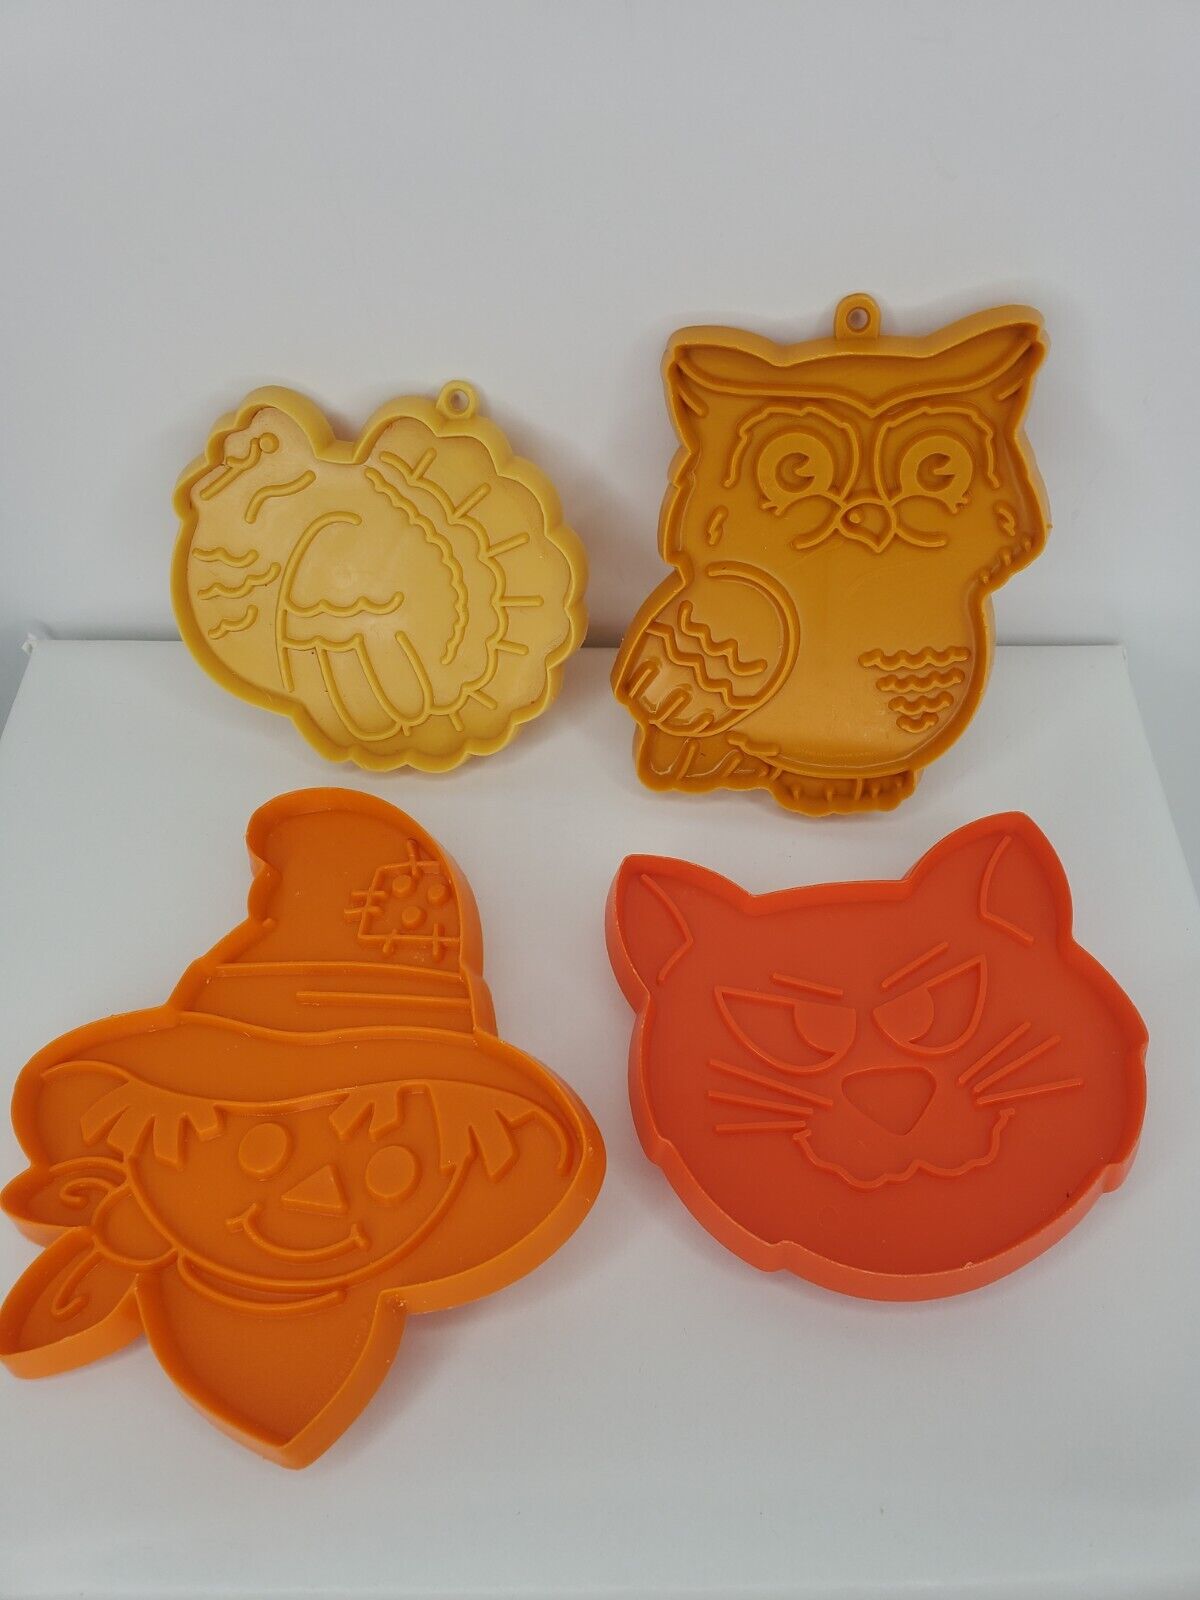 Vintage Hallmark Holiday Cookie Cutters Lot of 4 Halloween Fall Thanksgiving 